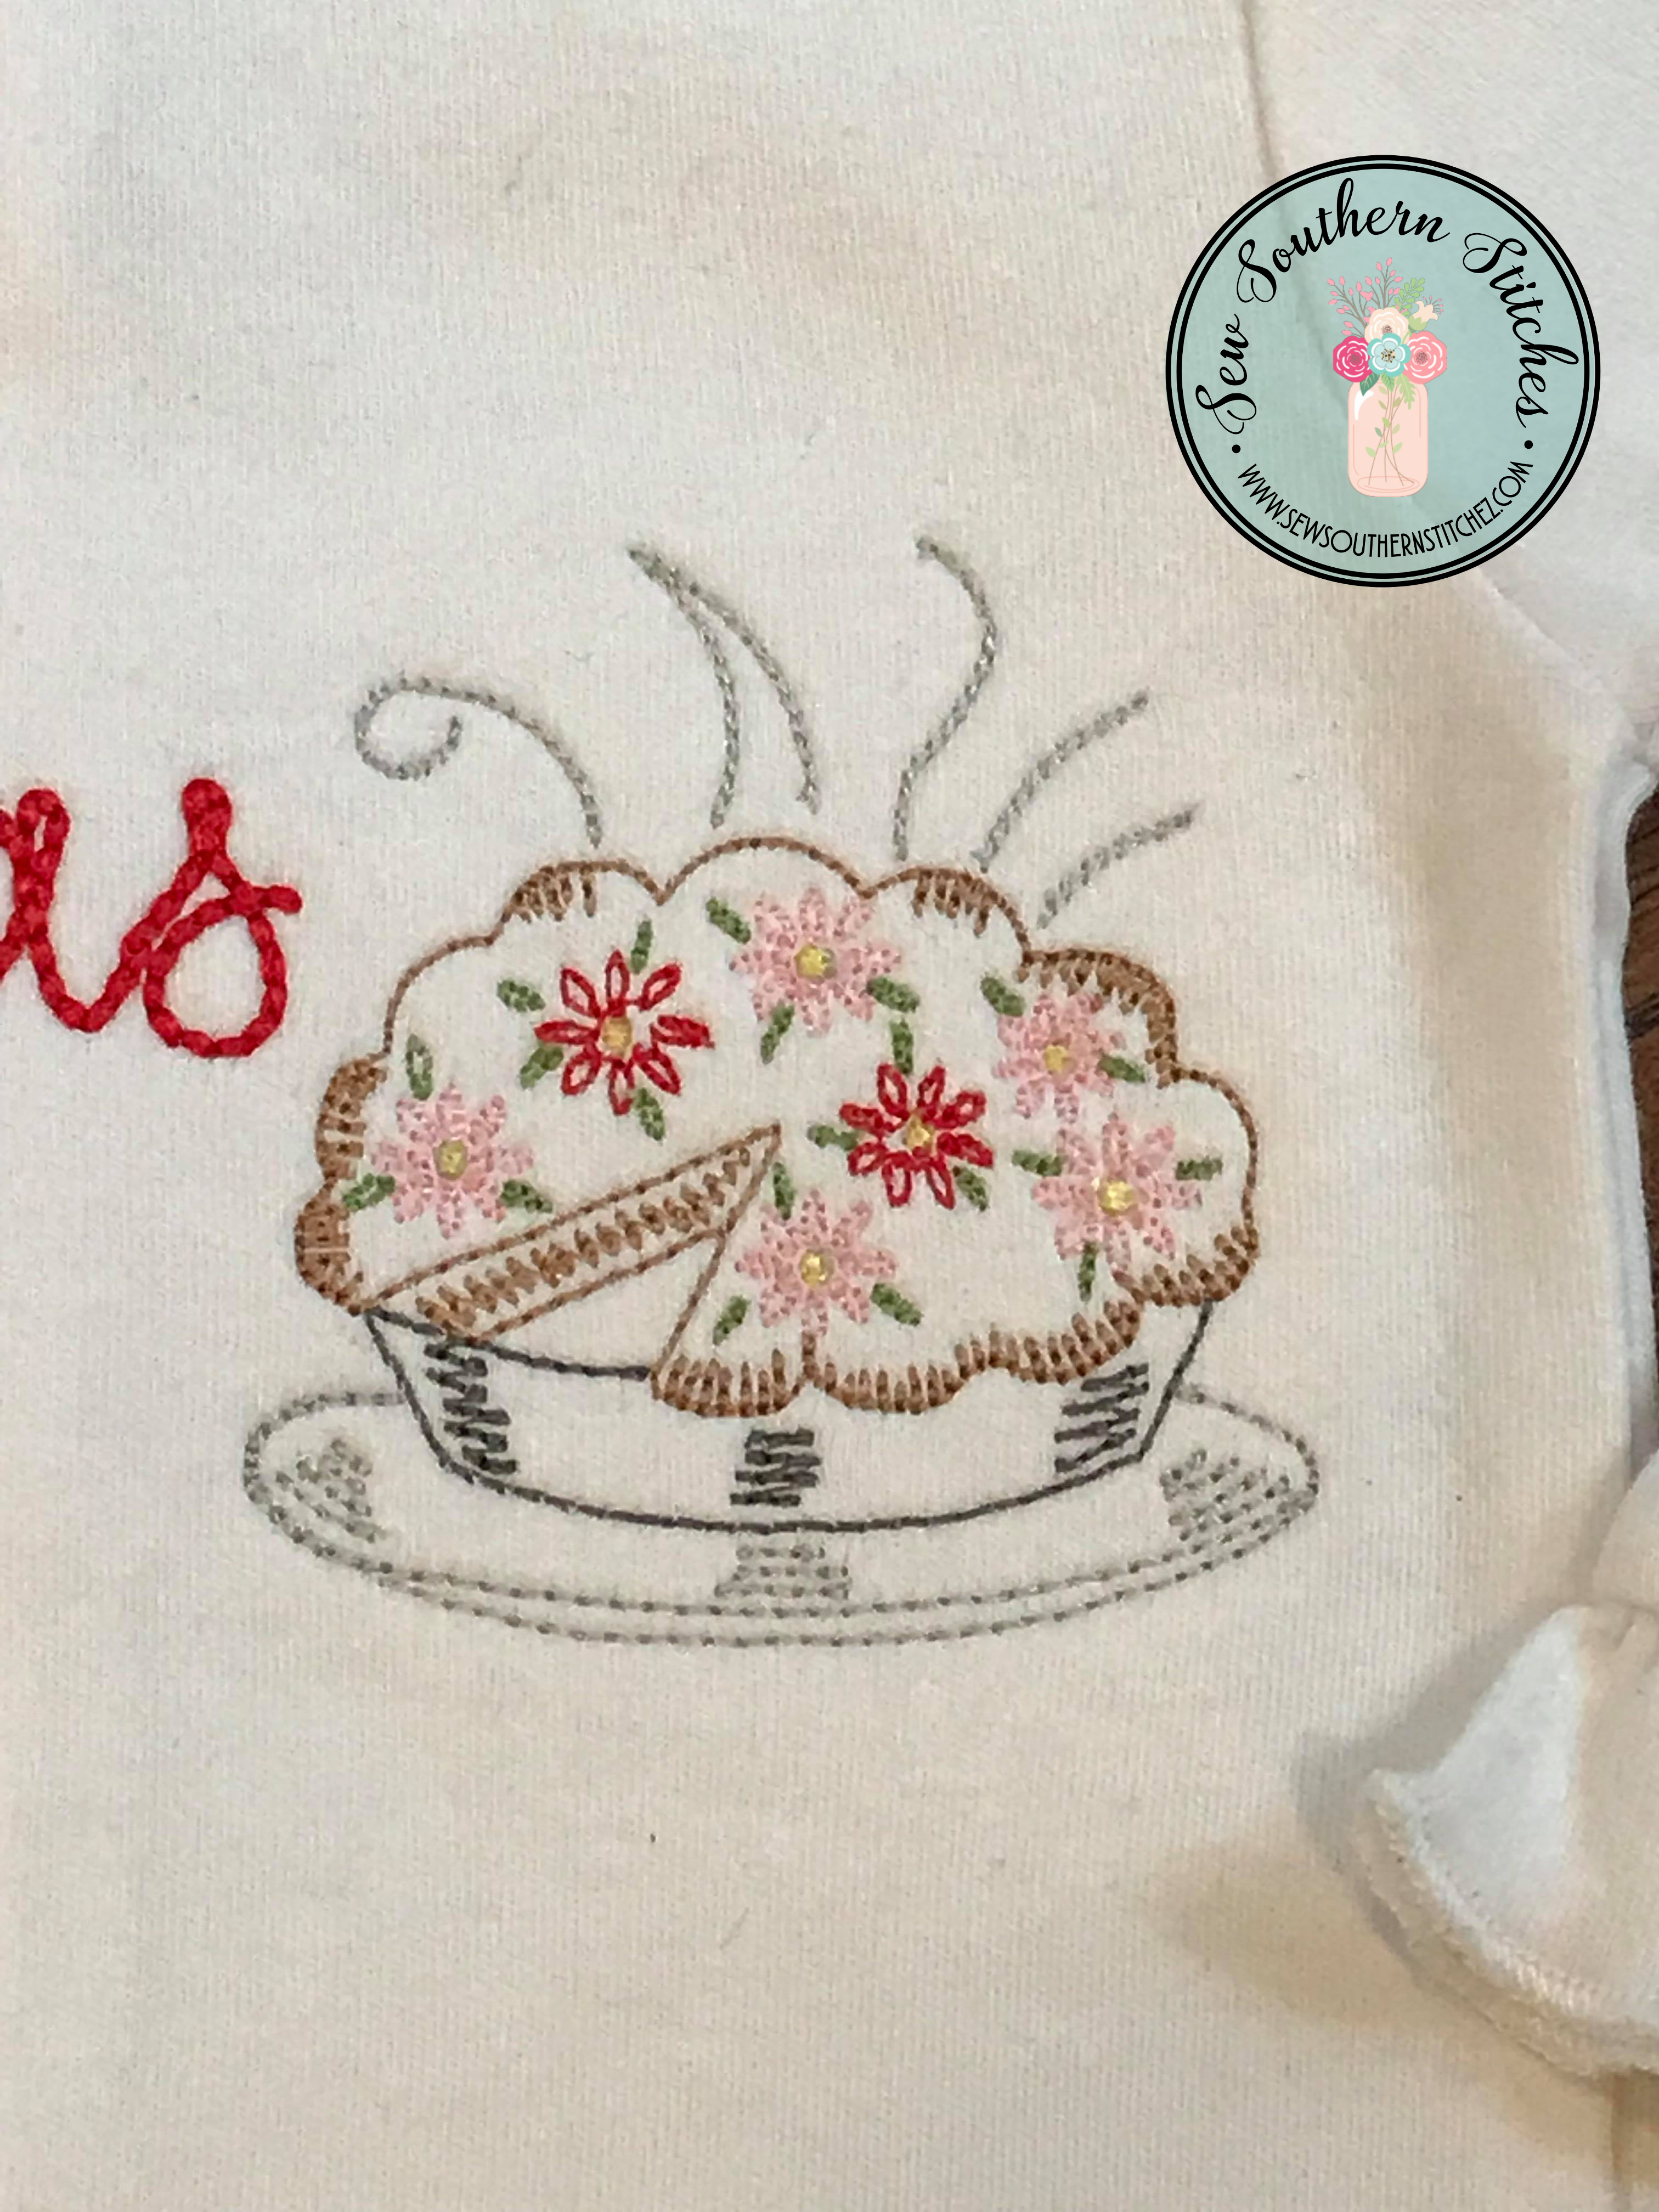 Convert Picture To Embroidery Pattern Vintage Pie Embroidery Design Heirloom Triple Bean Sketch Back Stitched Vintage